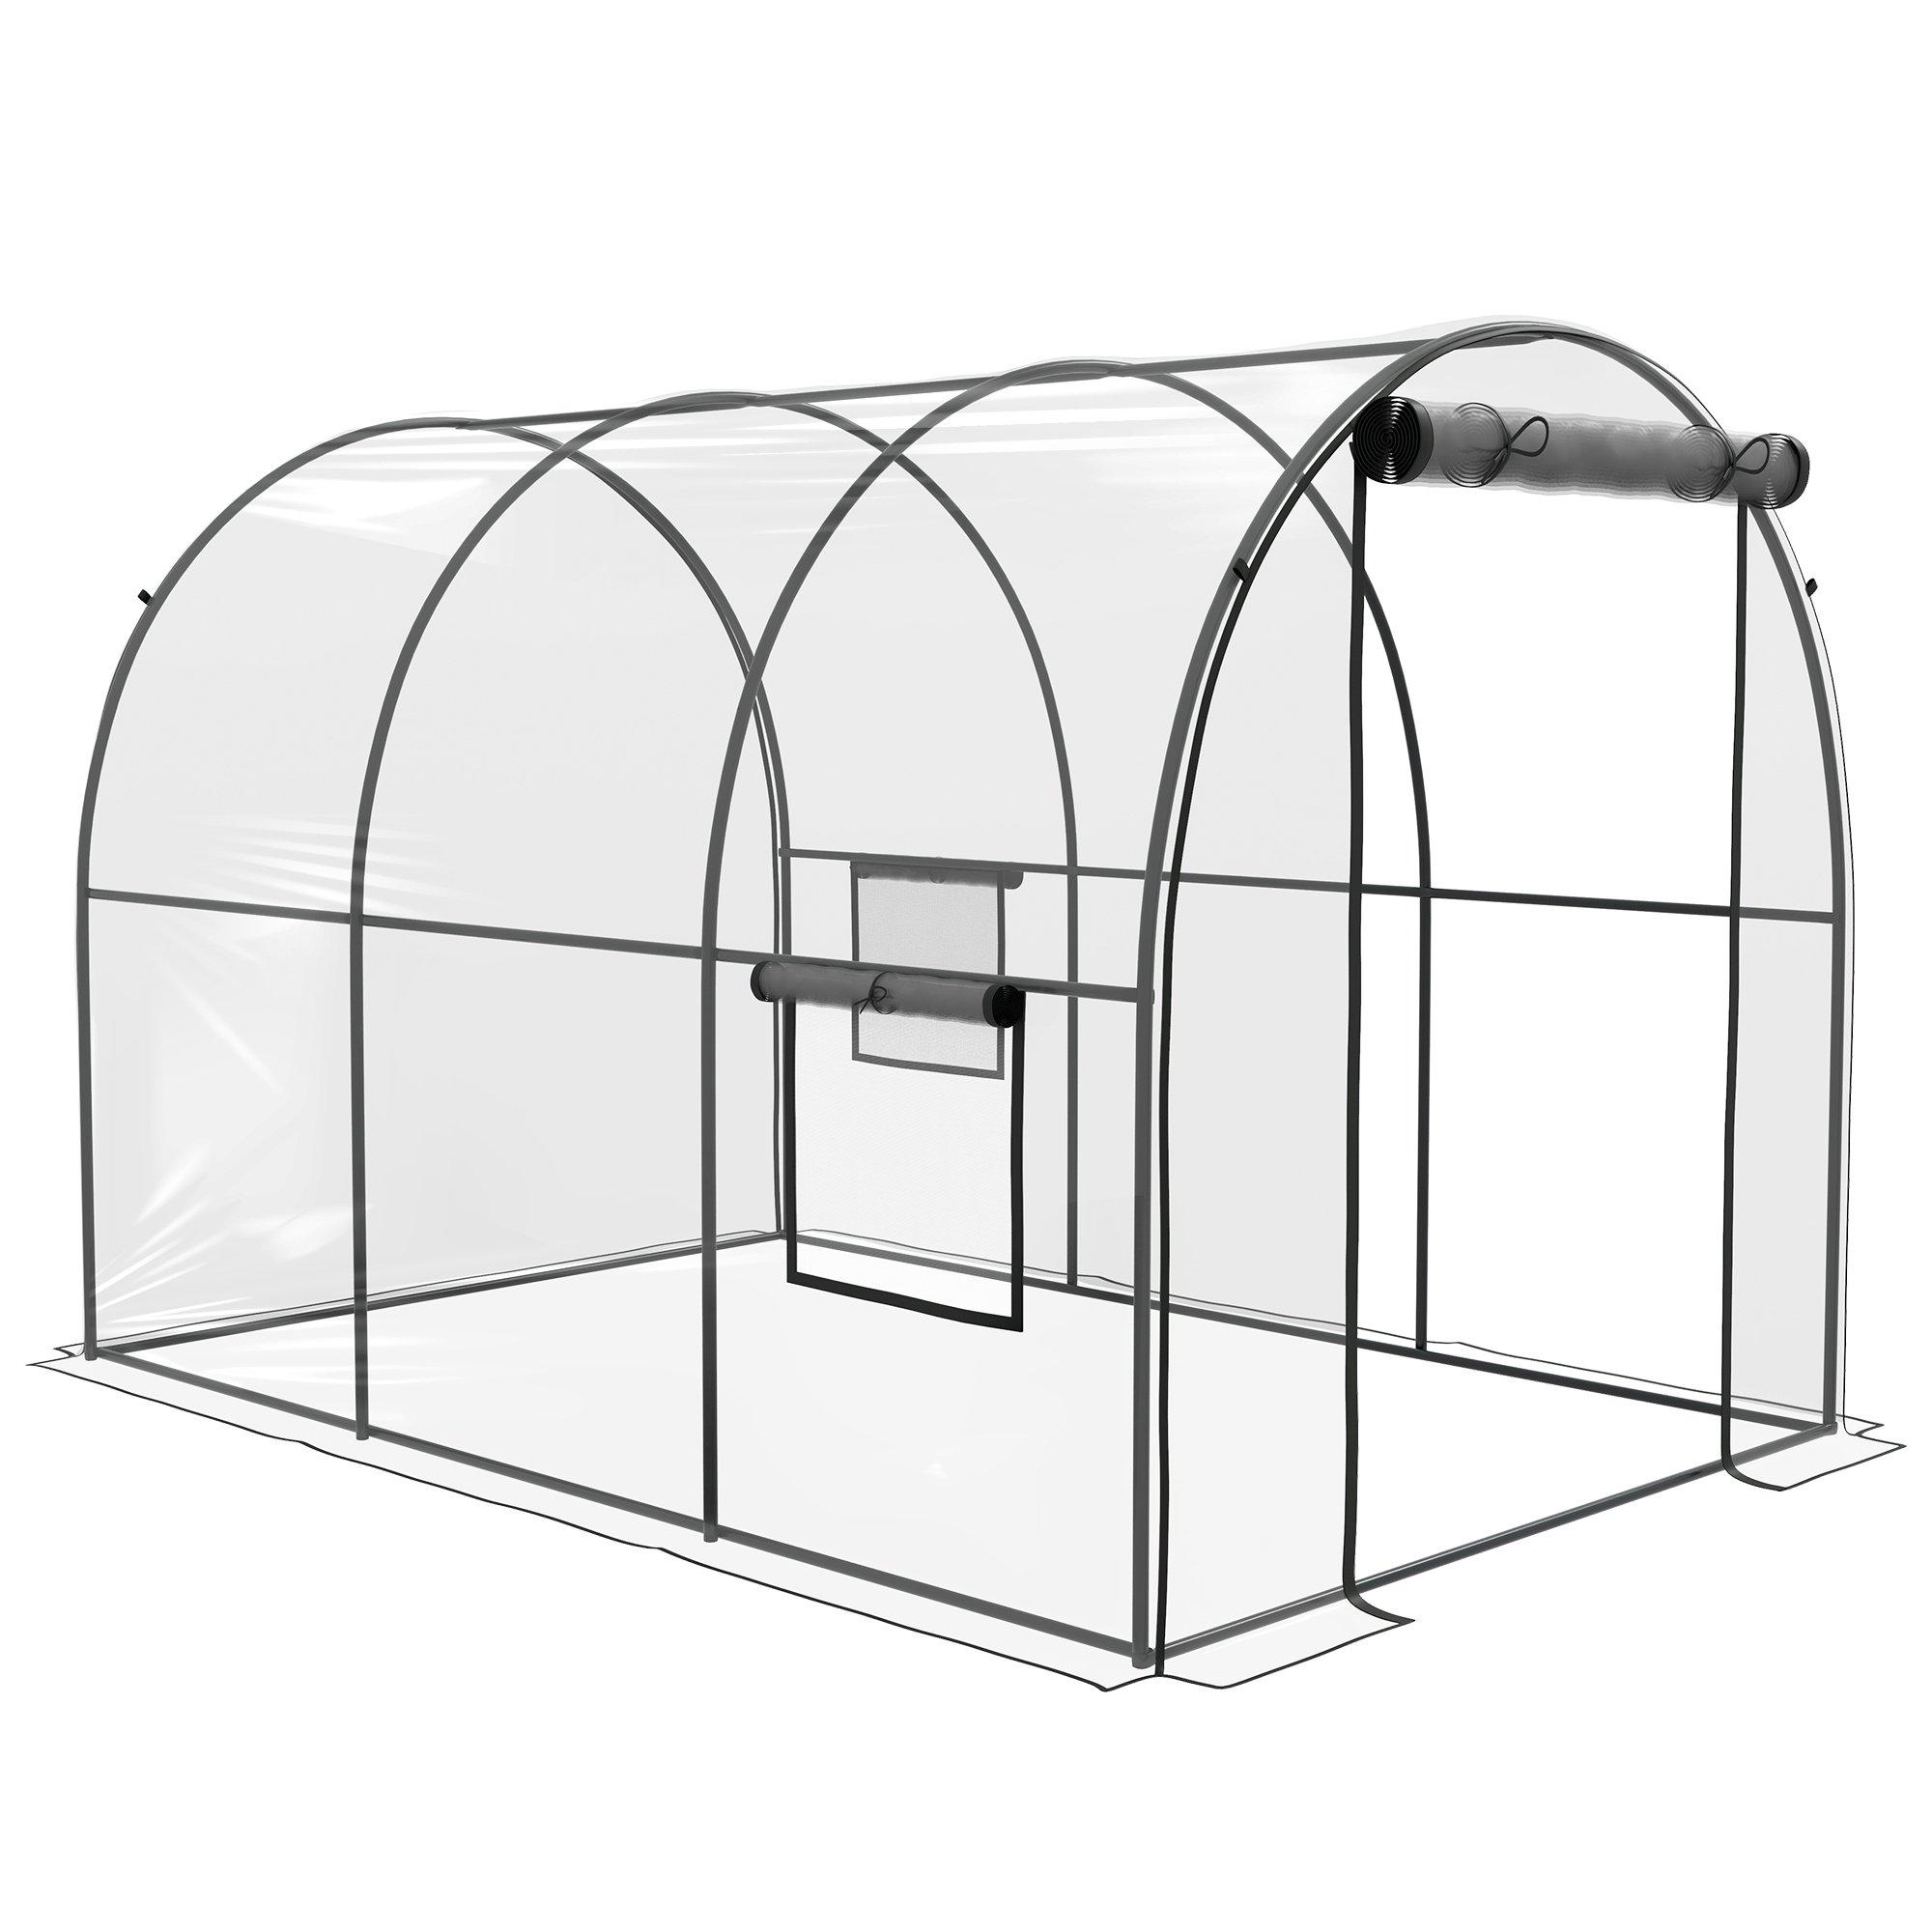 Polytunnel Greenhouse with Clear Cover, Walk-in Grow House, 3 x 2 x 2m